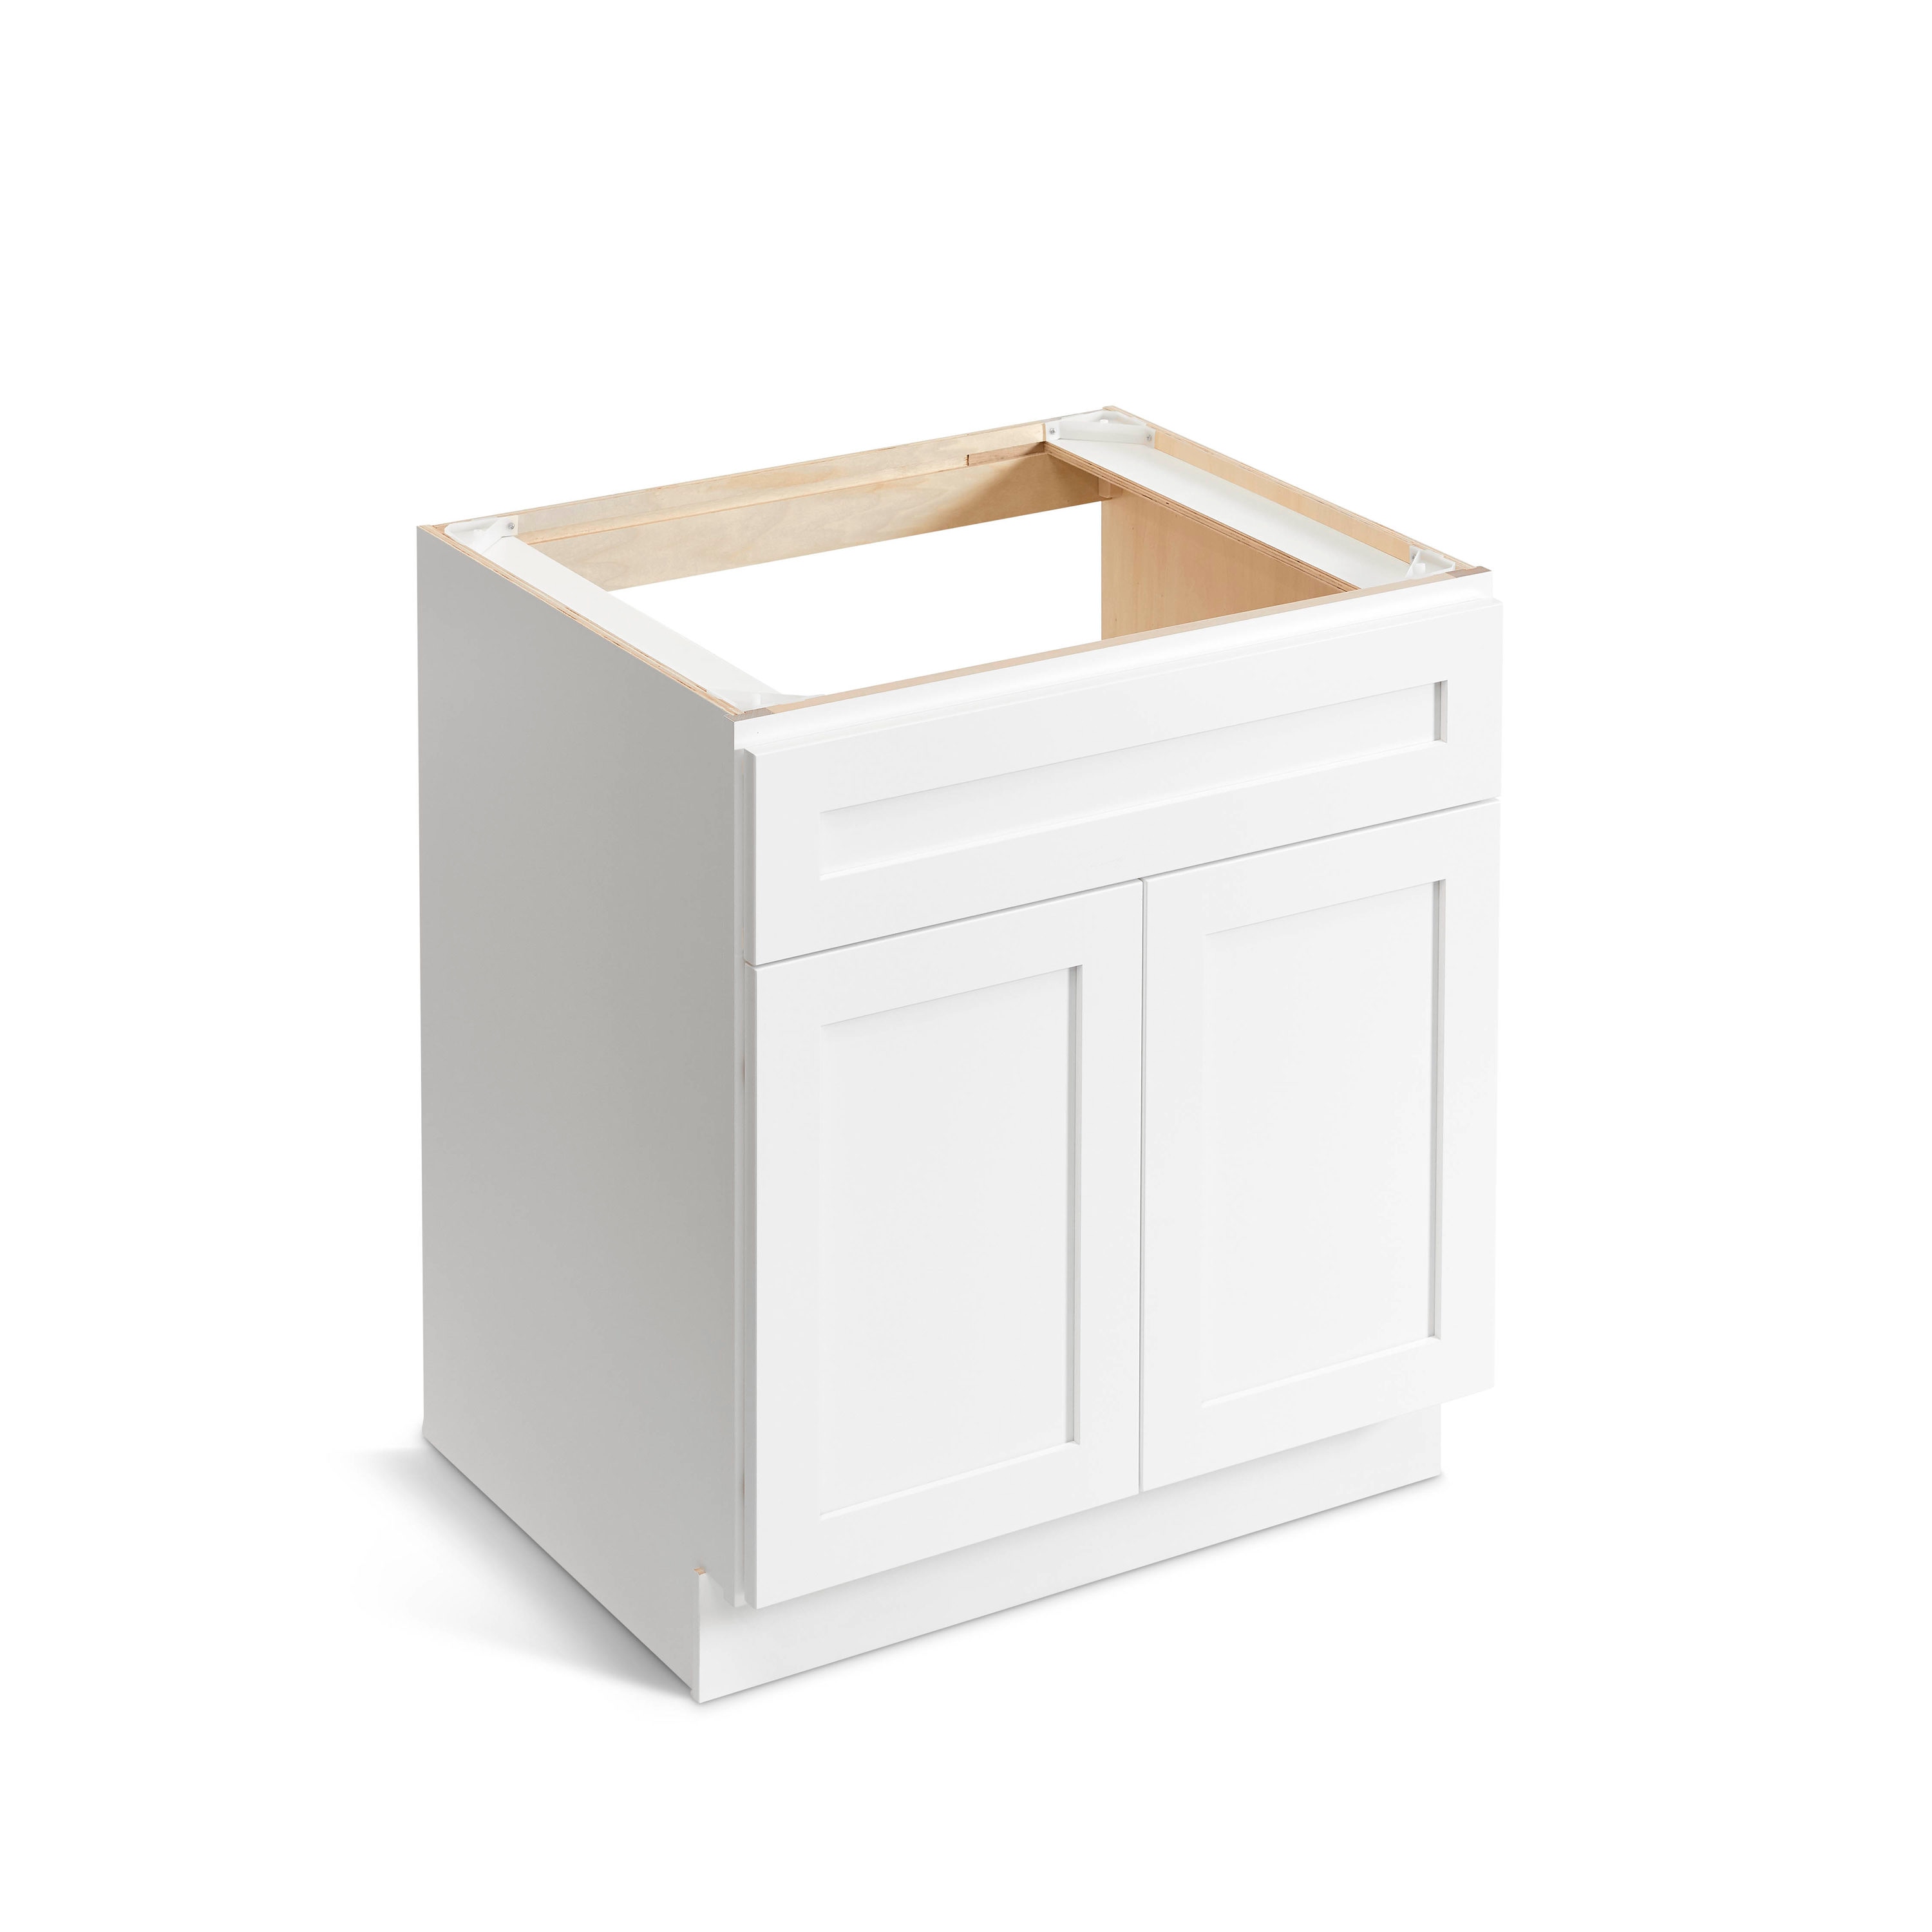 Valleywood Cabinetry Pure White 30-in Pure White Bathroom Vanity Base Cabinet without Top